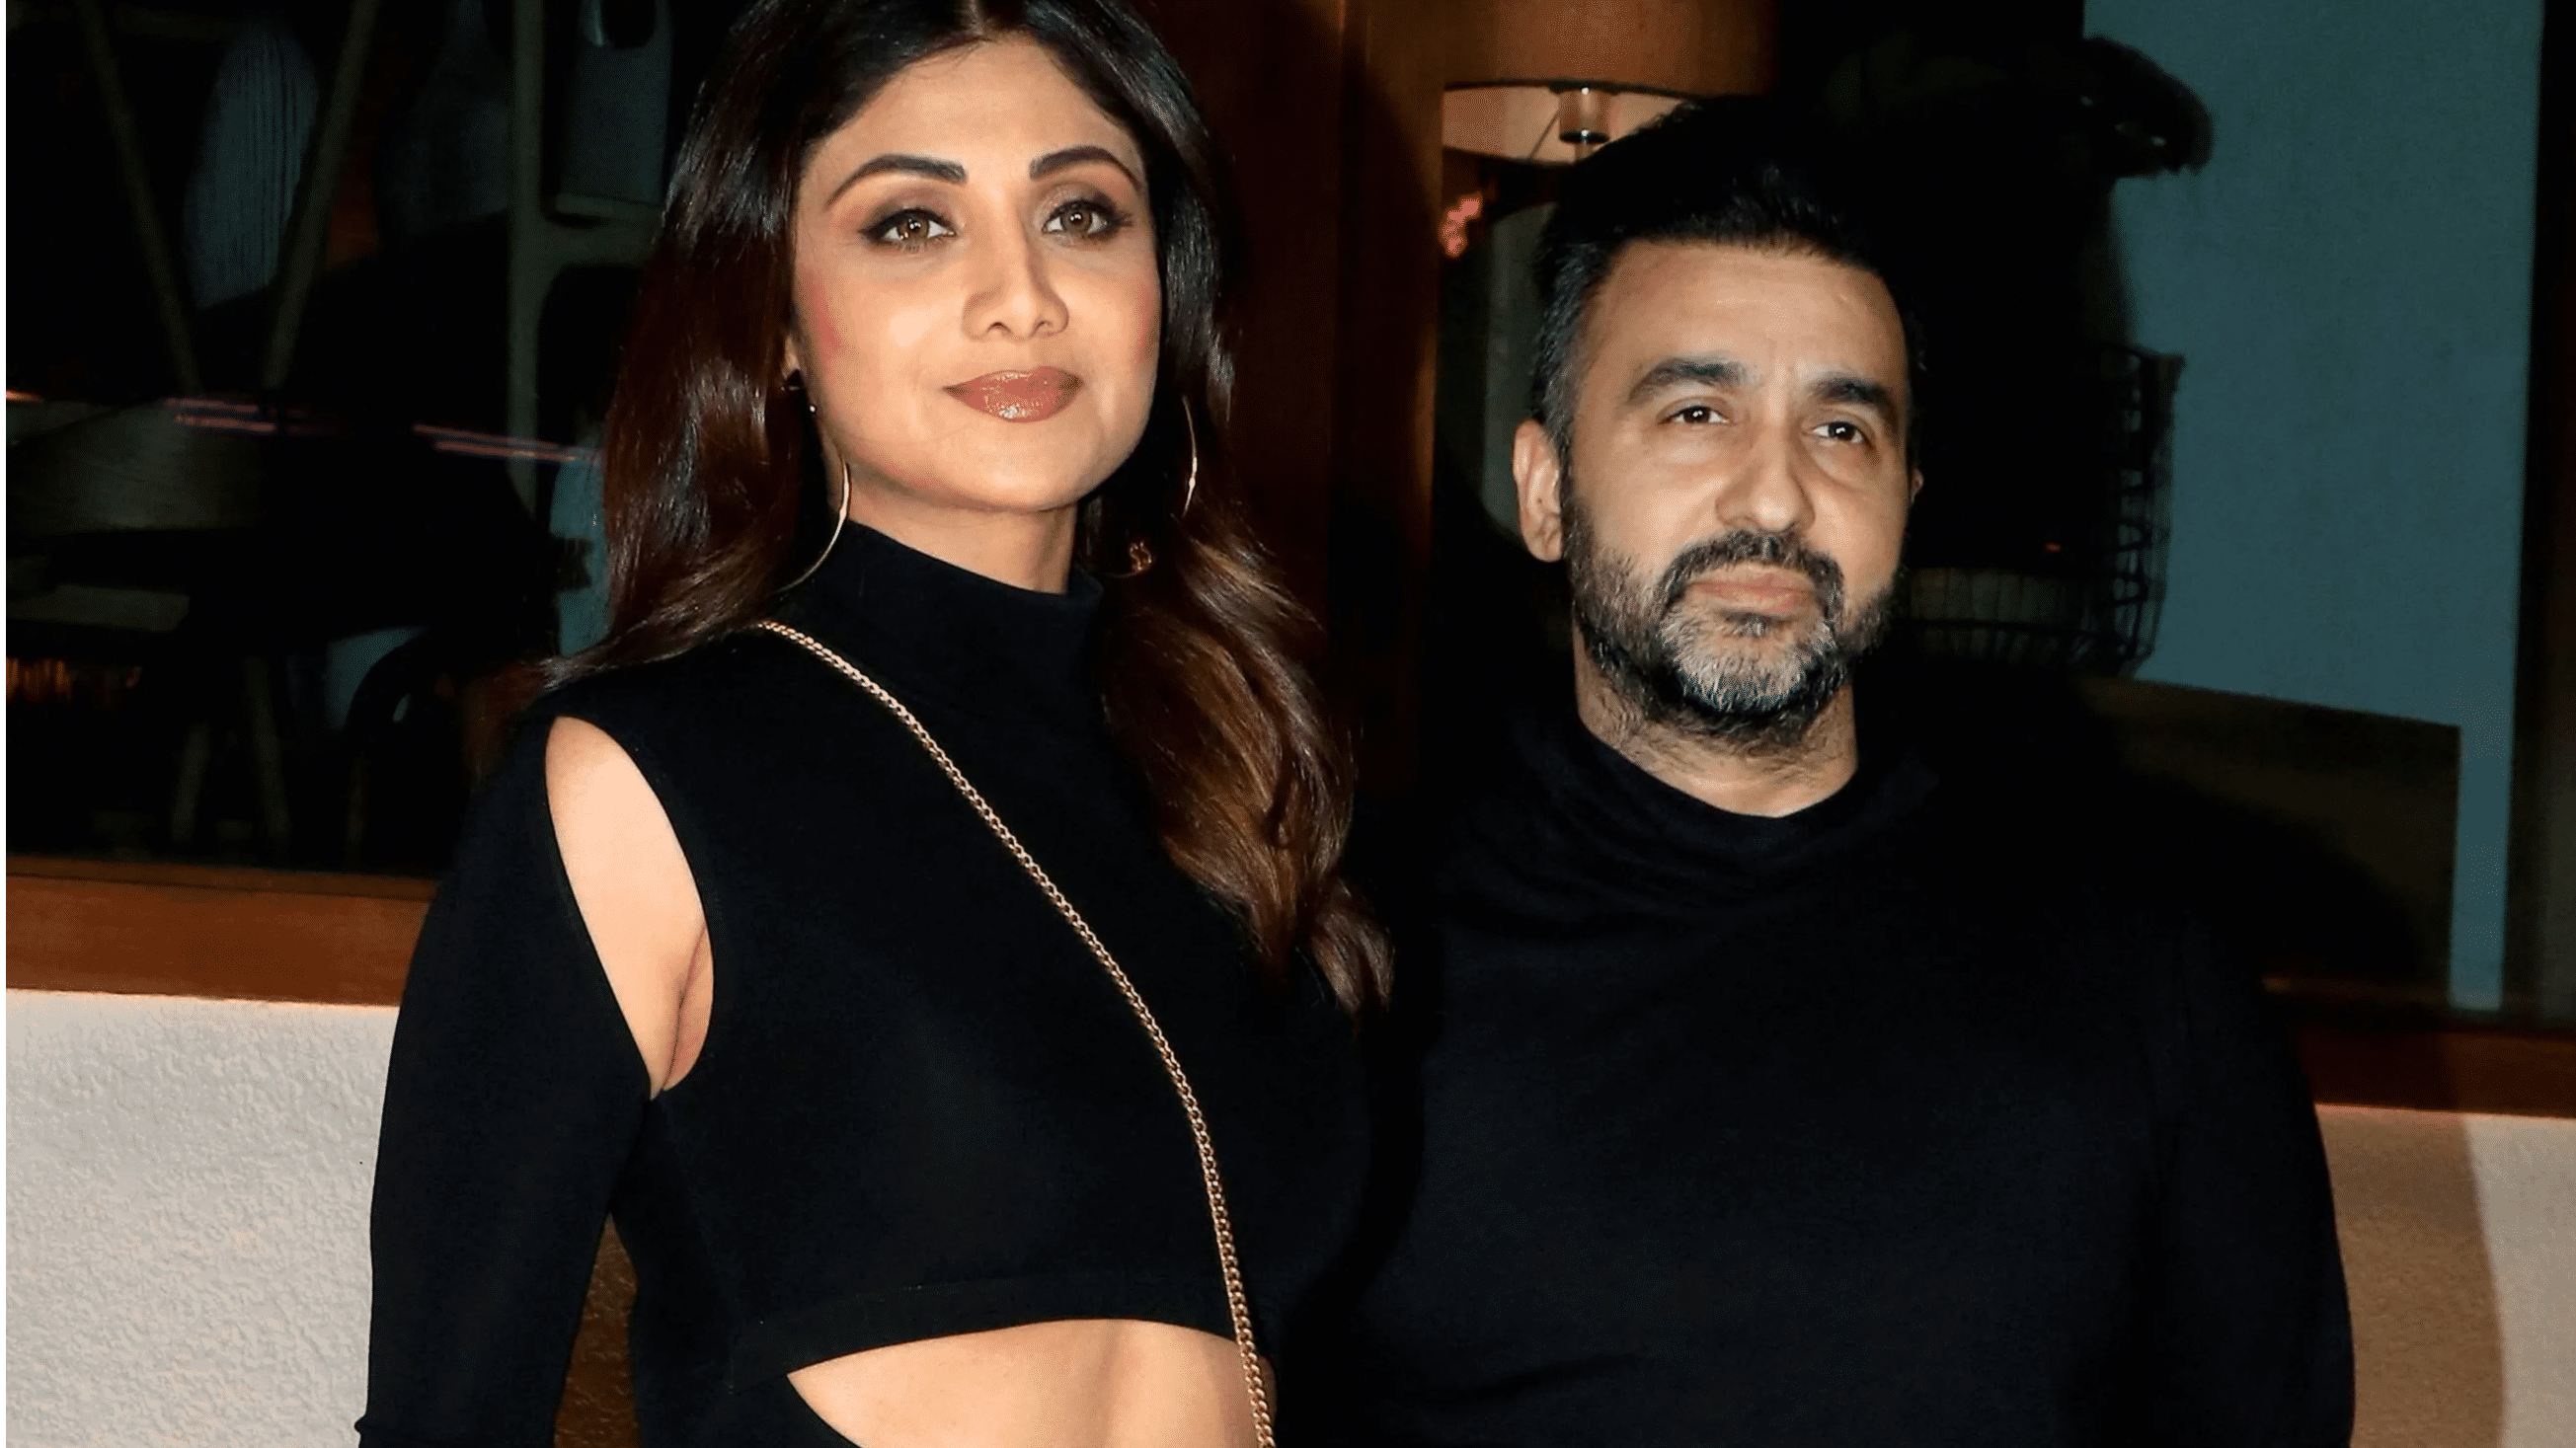 Haven’t found active role of Shilpa Shetty yet: Police after Raj Kundra’s arrest